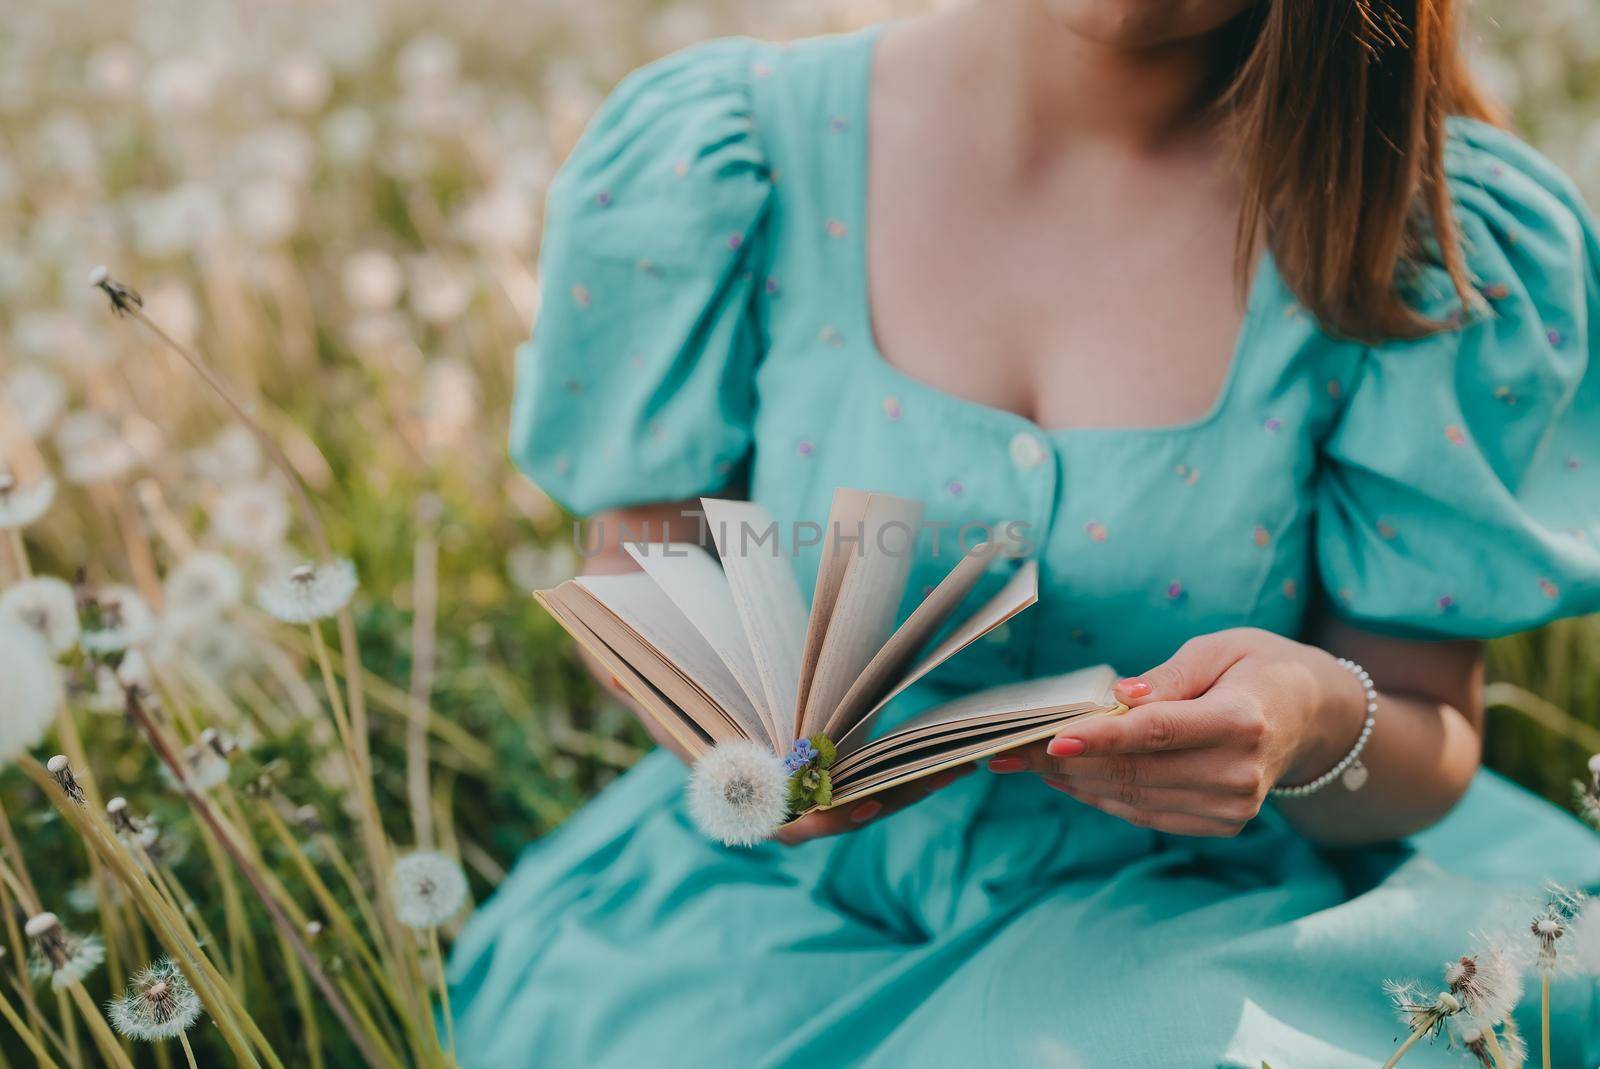 Woman flips through pages of paper book. Lady in retro or vintage dress reading interesting novel while sitting on nature. Atmospheric scene. Education, hobby, entertainment concept.High quality photo